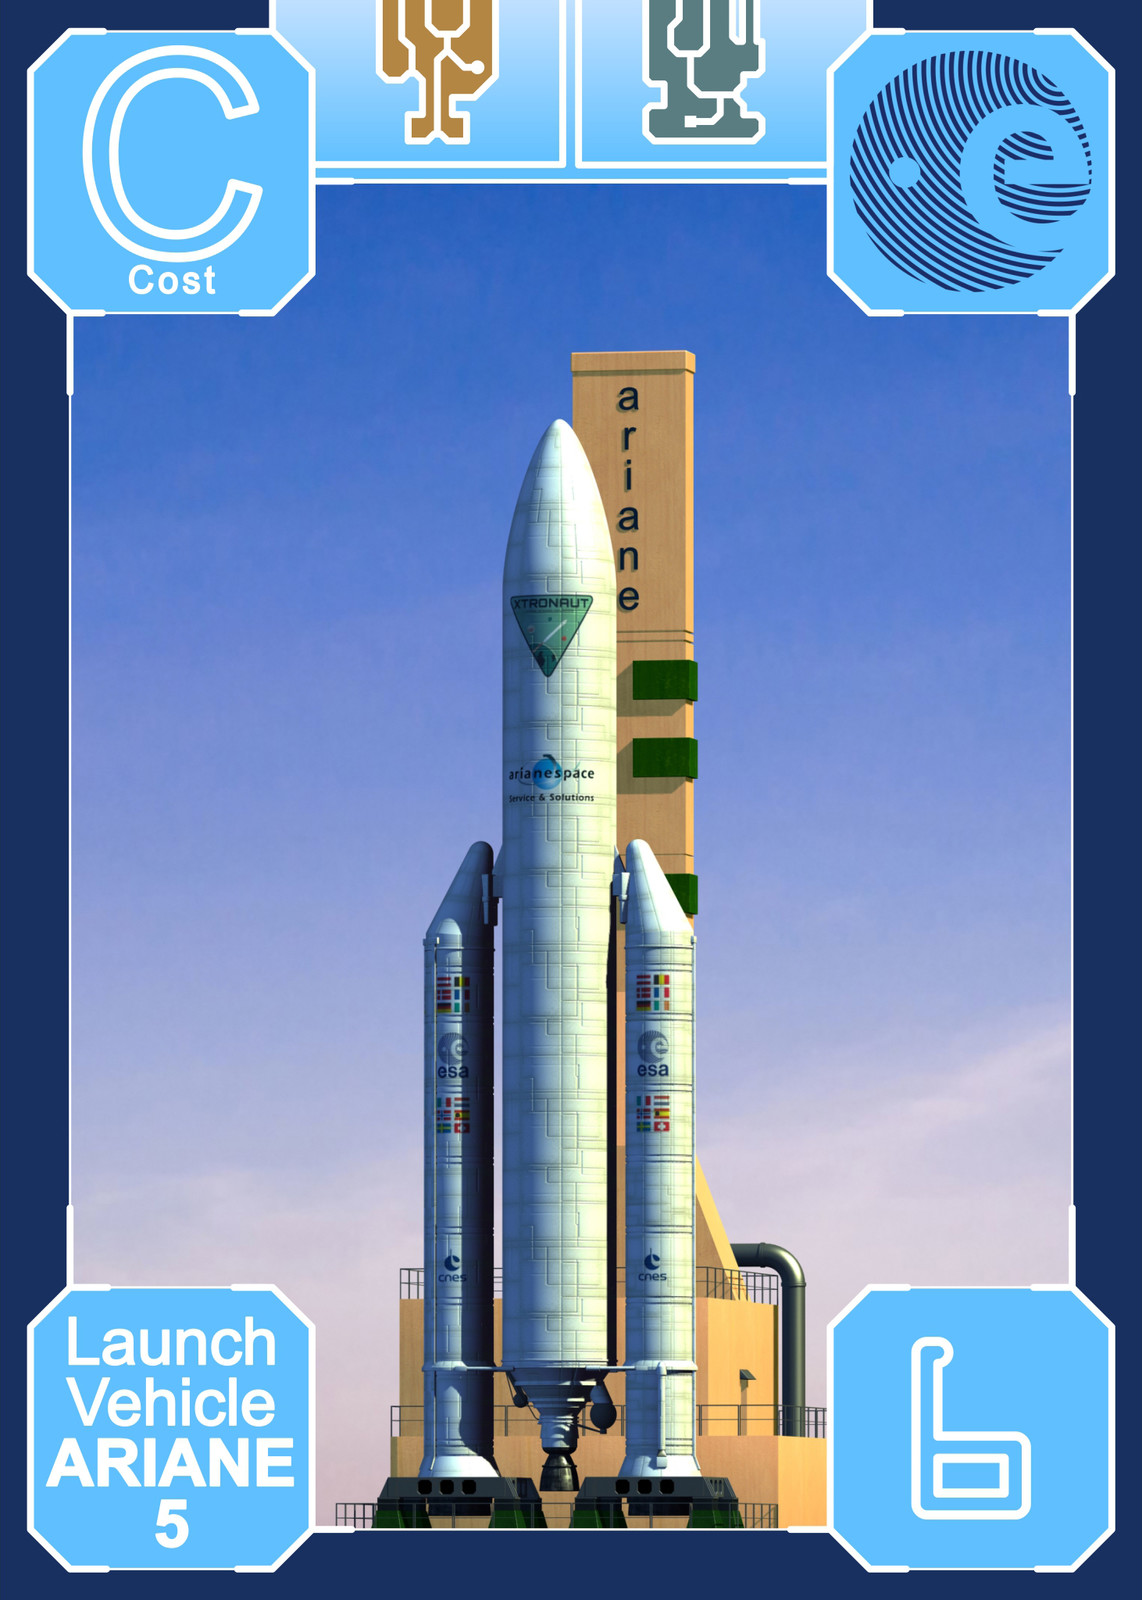 Ariane 5 rocket playing card complete (illustration + graphic design).